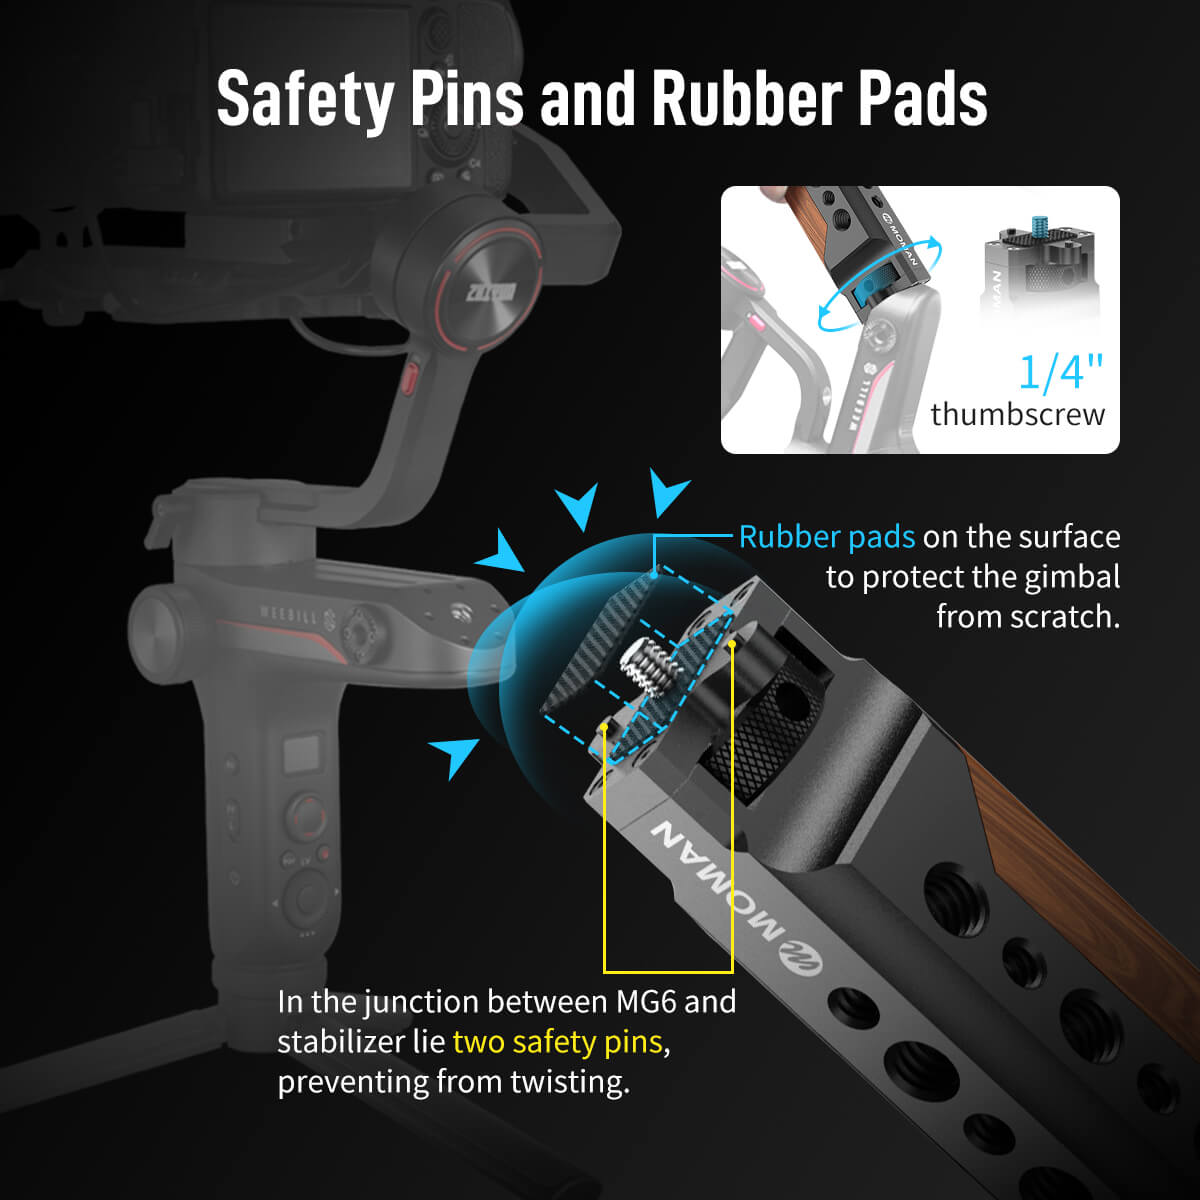 Moman MG6 possesses two safety pins for preventing from twisting and rubber pads to protect the gimbal from scratch